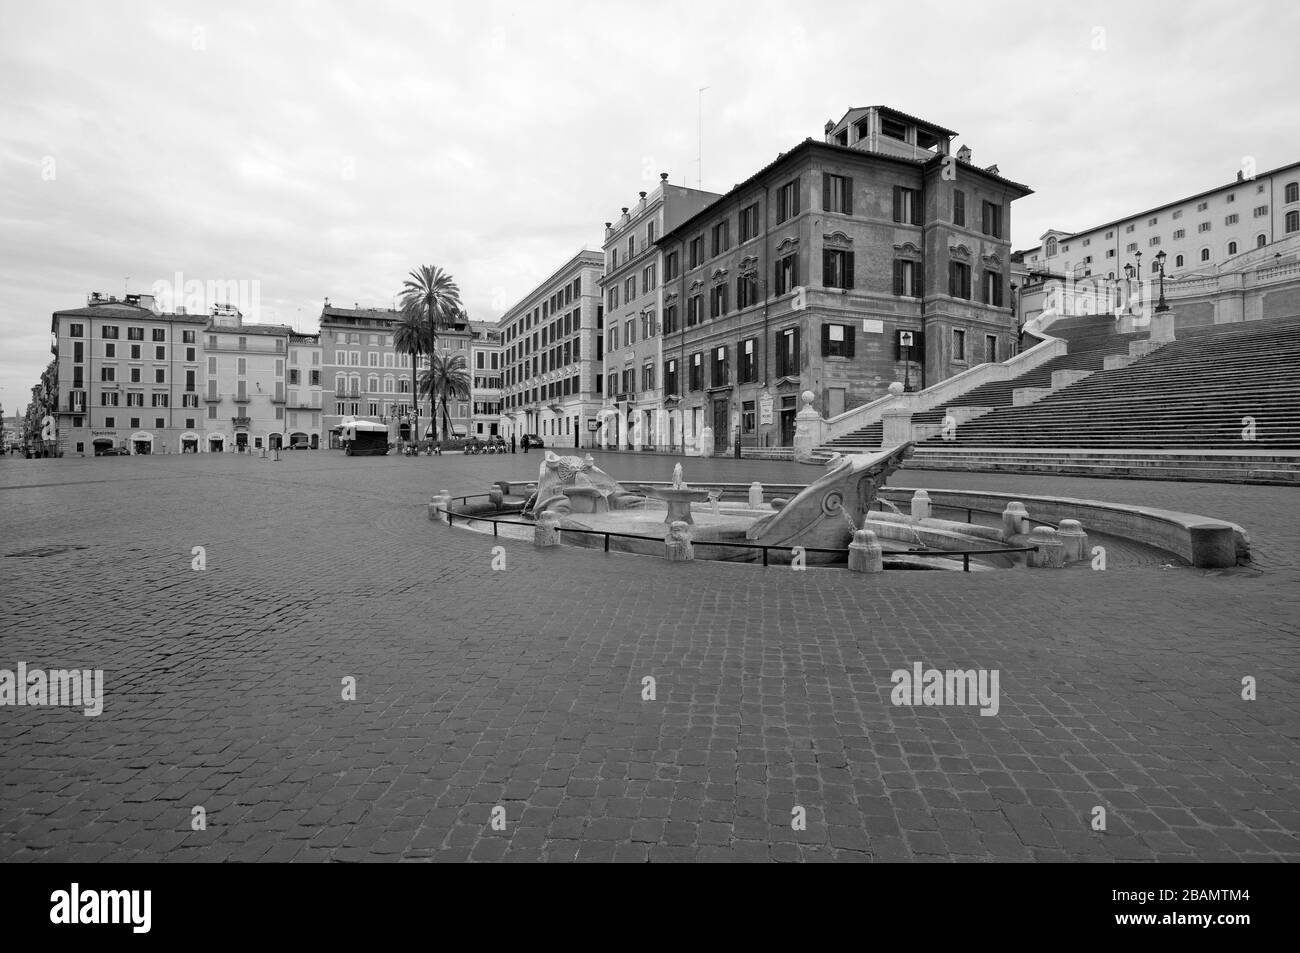 28 March 2020 - Piazza di Spagna deserted during the Coronavirus emergency, Rome, Italy Stock Photo